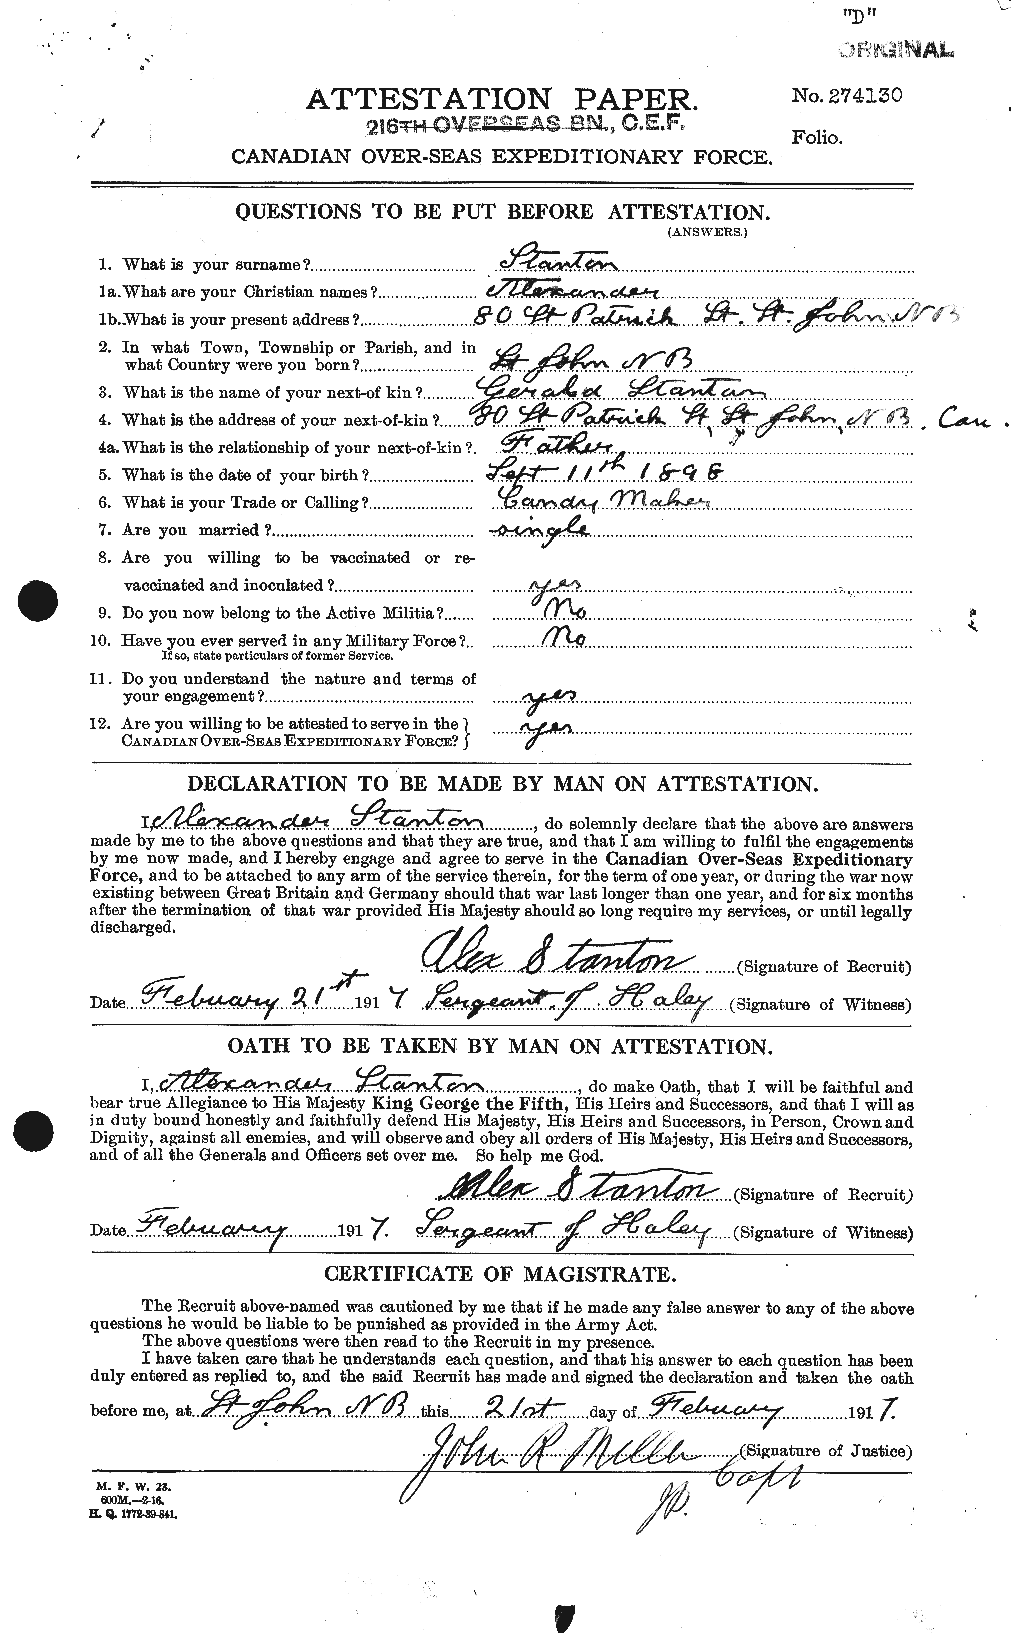 Personnel Records of the First World War - CEF 114558a